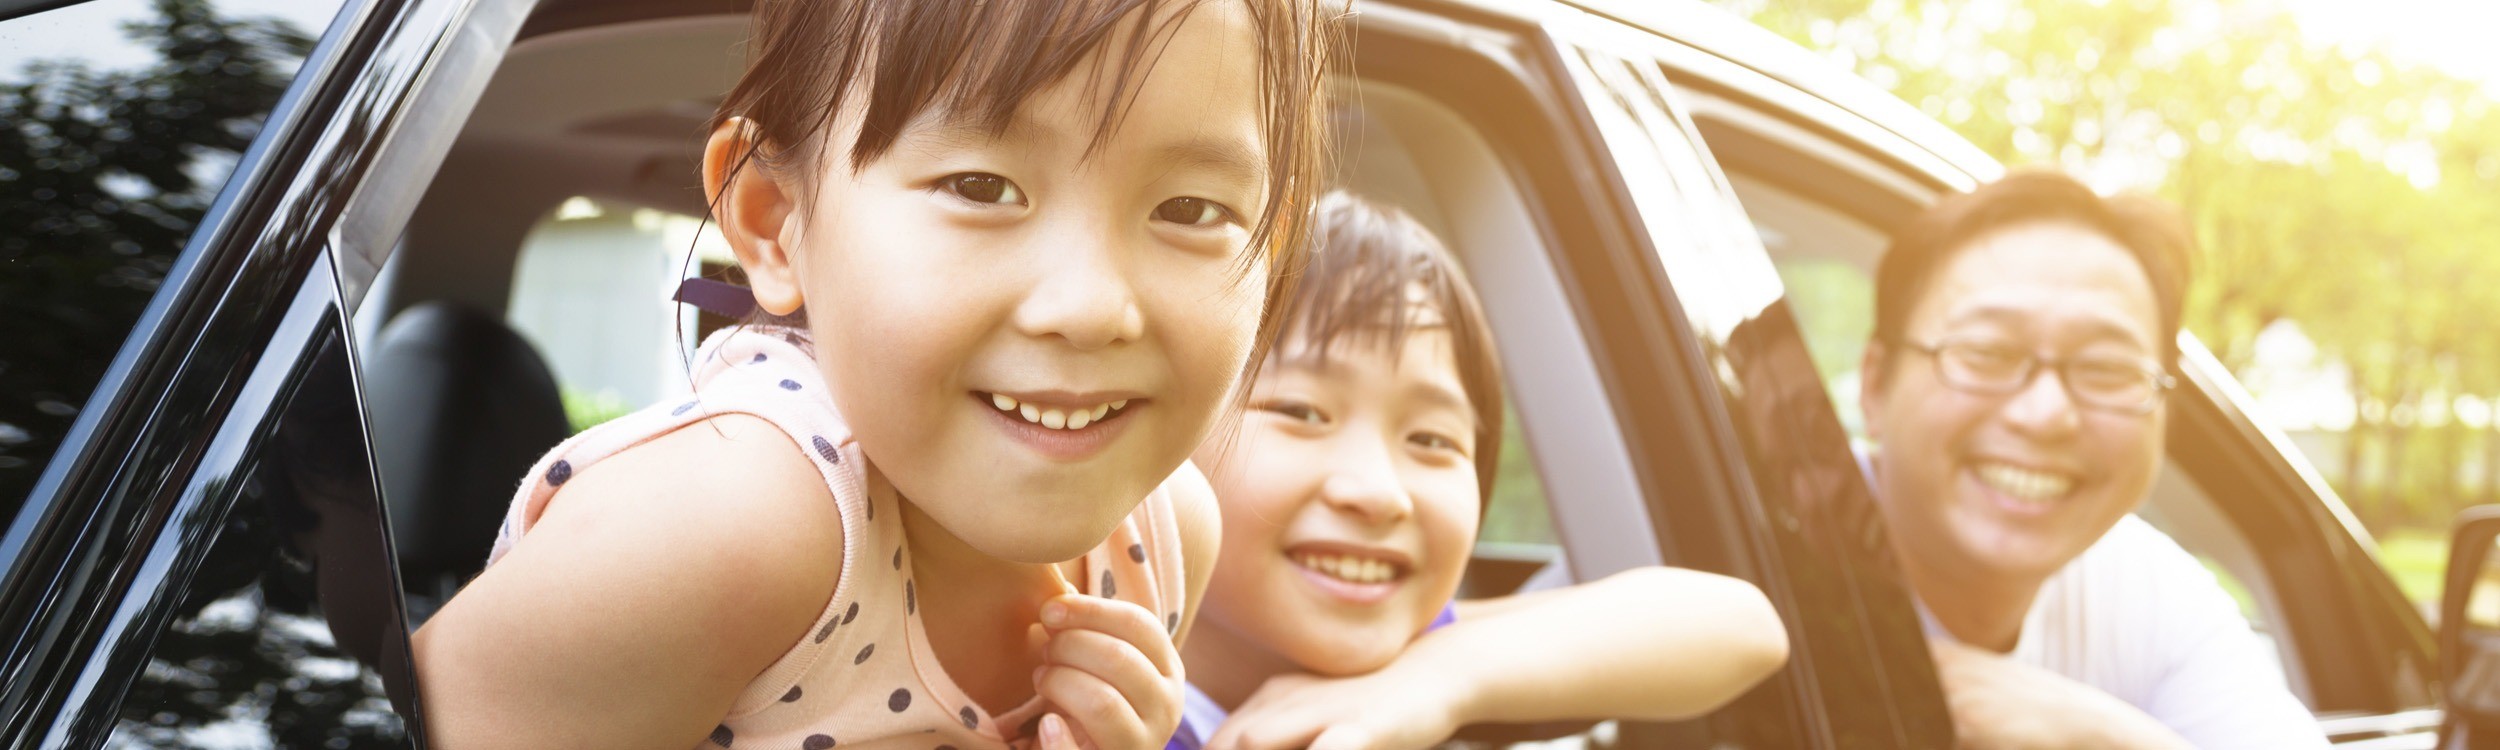 asian family in car smiling